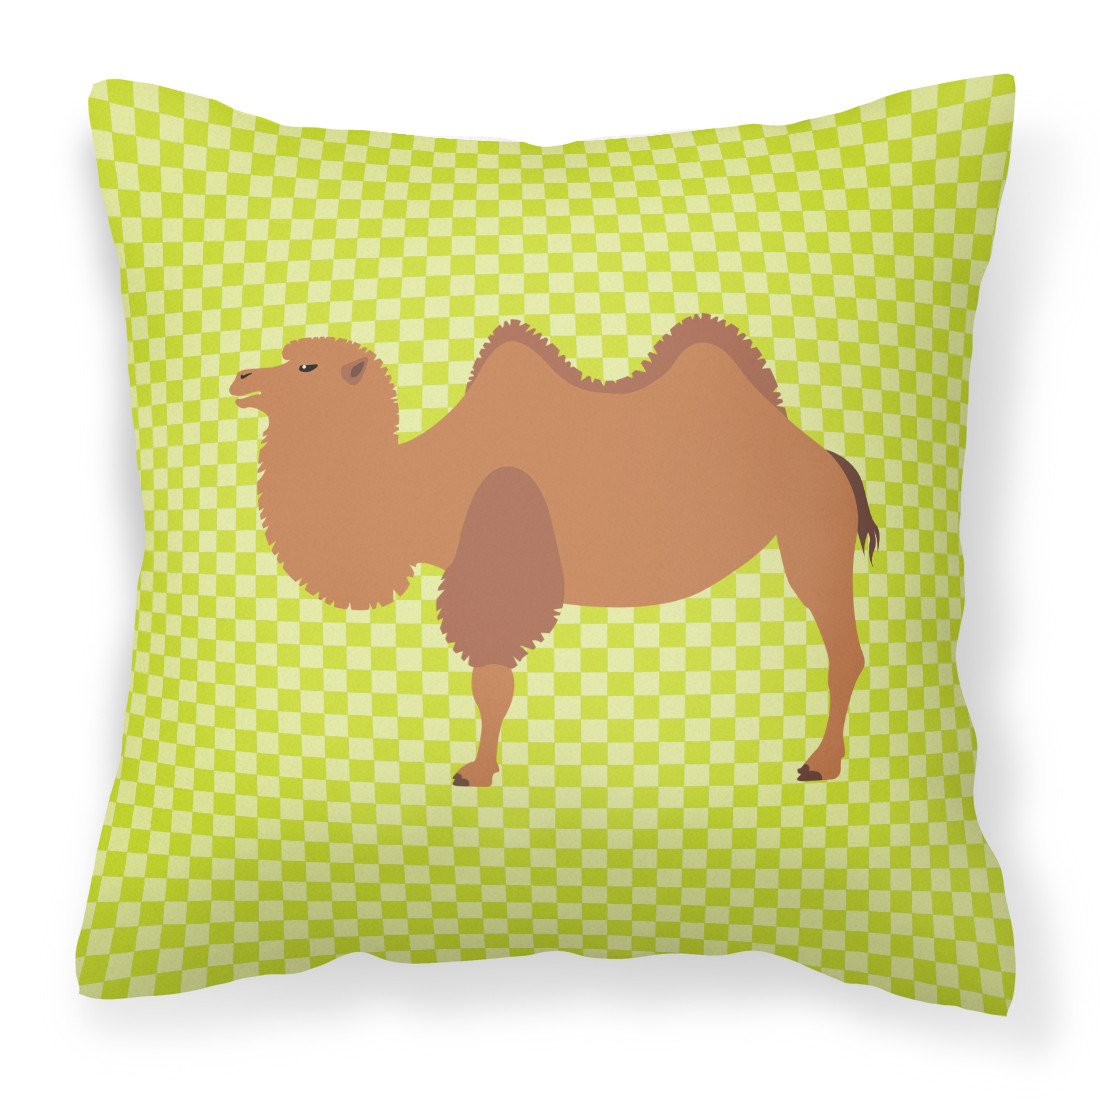 Bactrian Camel Green Fabric Decorative Pillow BB7644PW1818 by Caroline's Treasures